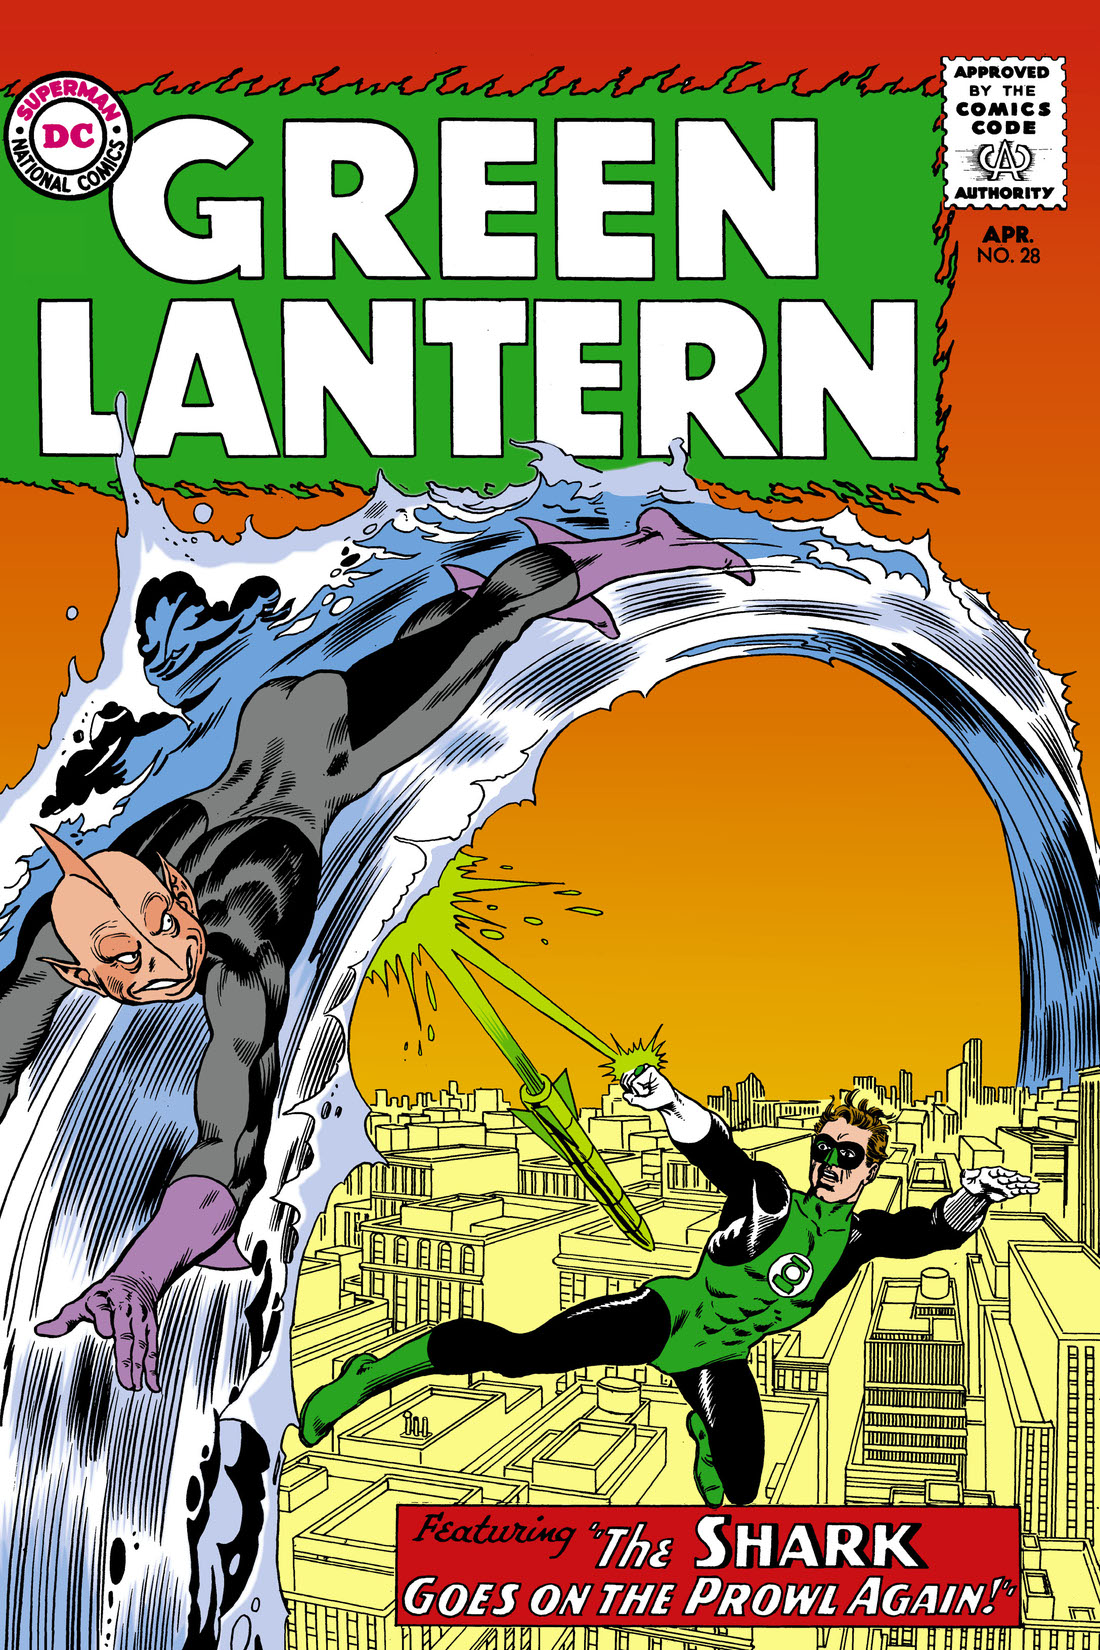 Green Lantern (1960-) #28 preview images